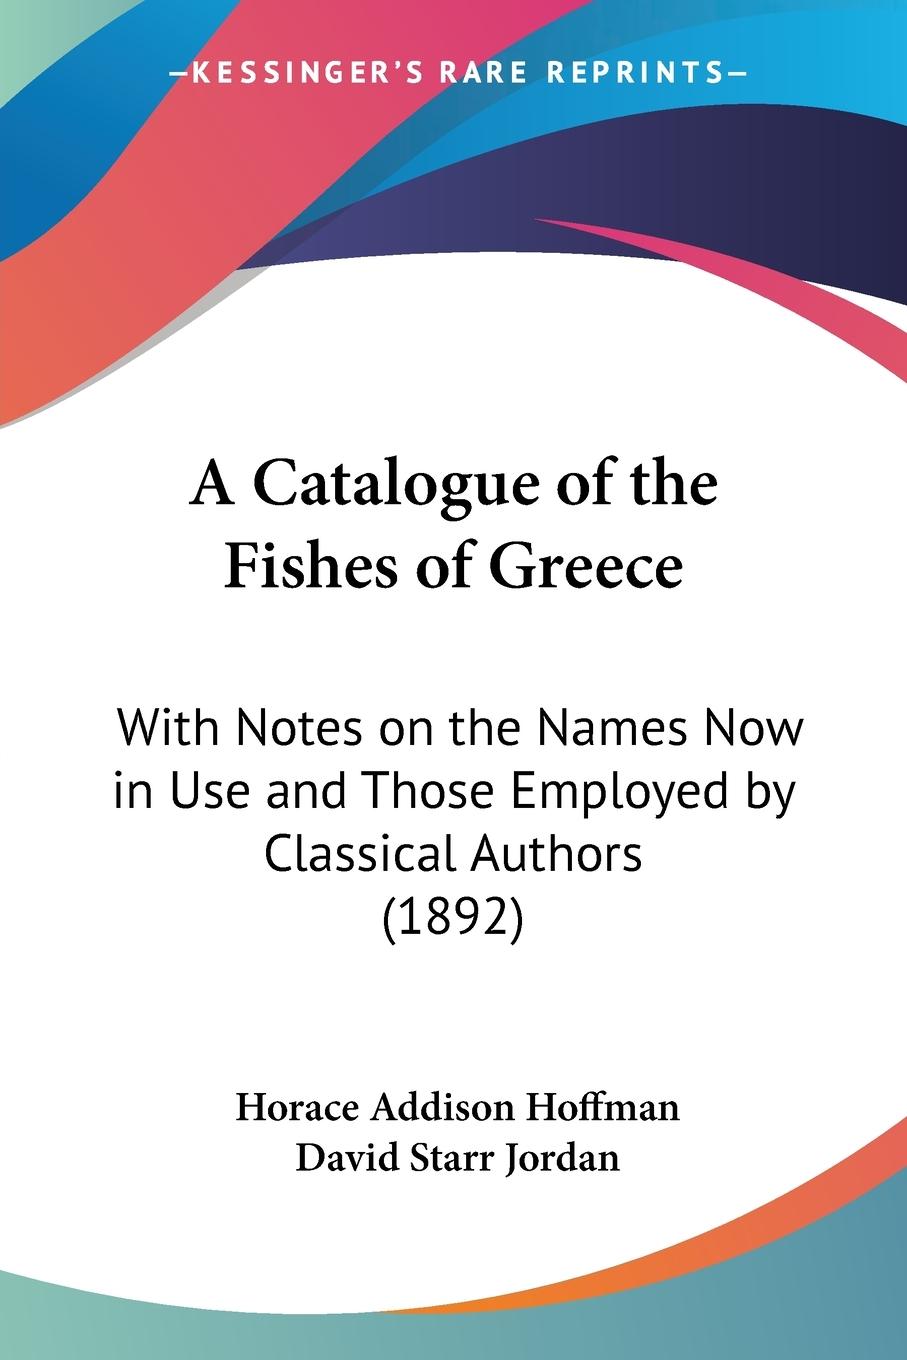 A Catalogue of the Fishes of Greece - Hoffman, Horace Addison Jordan, David Starr